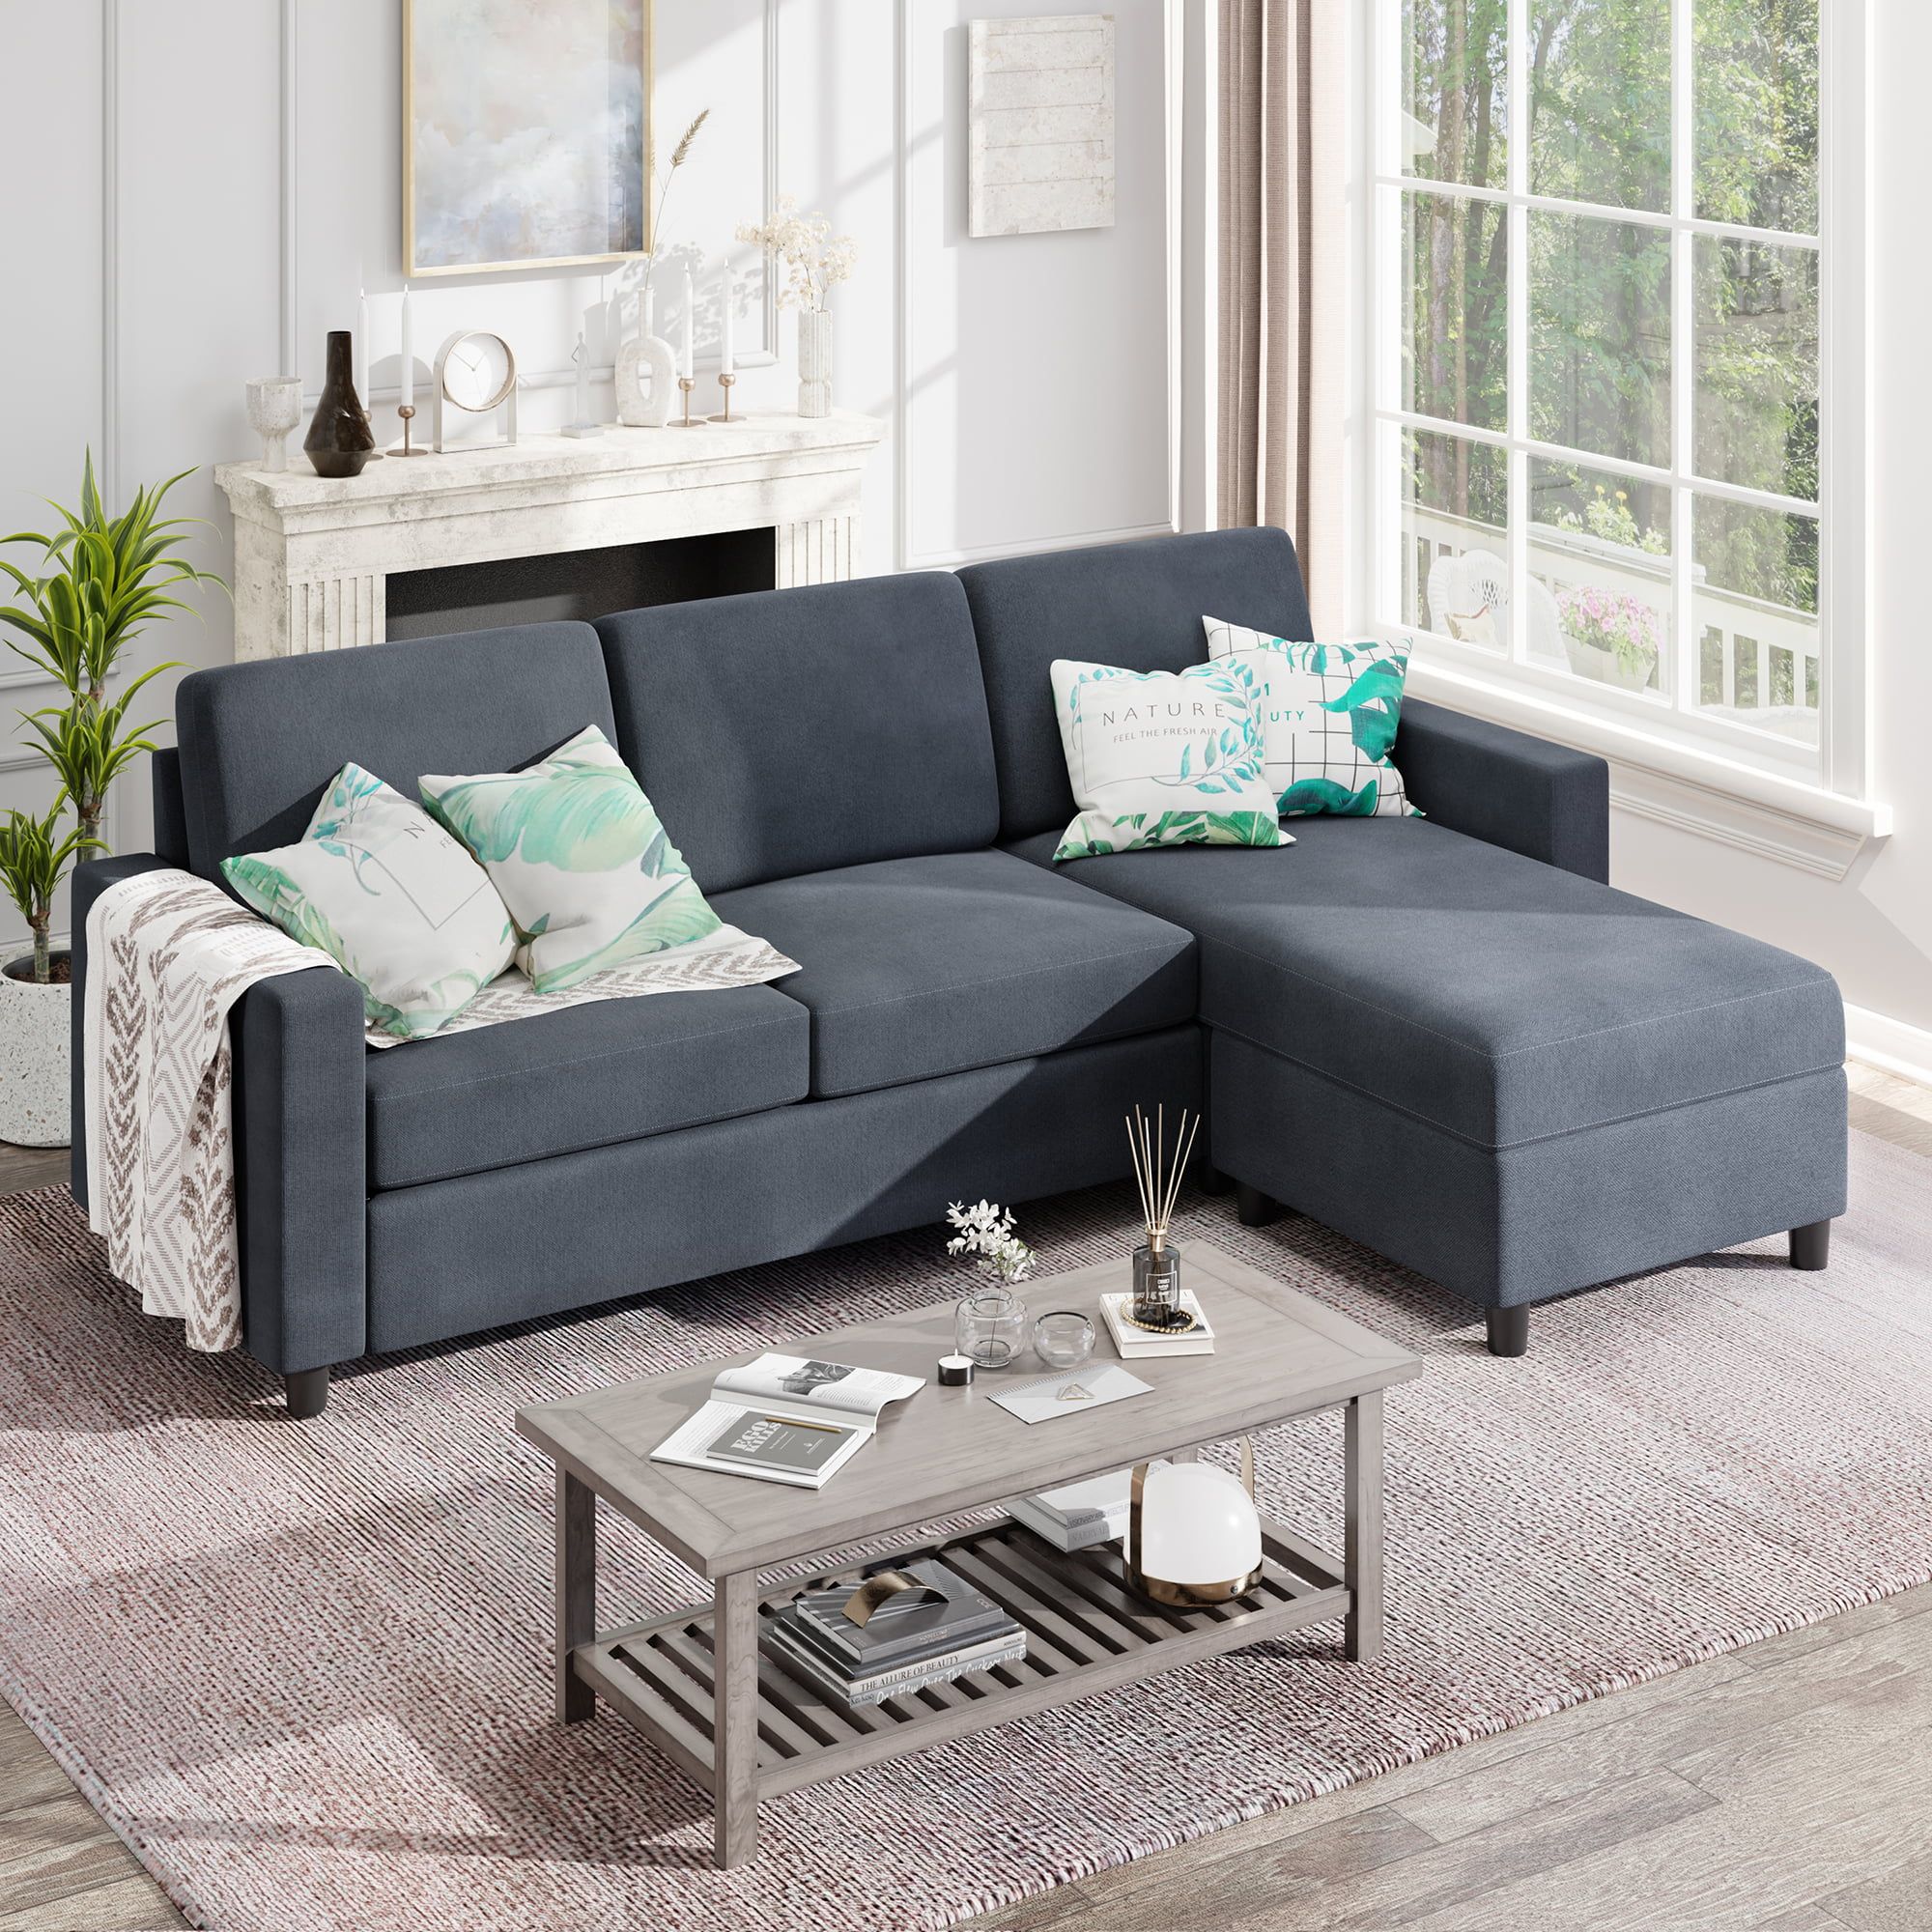 Sobaniilo Convertible Sectional Sofa Couch, Modern Linen Fabric L Shaped  3 Seat Sofa Sectional With Reversible Chaise For Small Space (dark Gray) –  Walmart Inside Sectional Couches For Living Room (View 7 of 20)